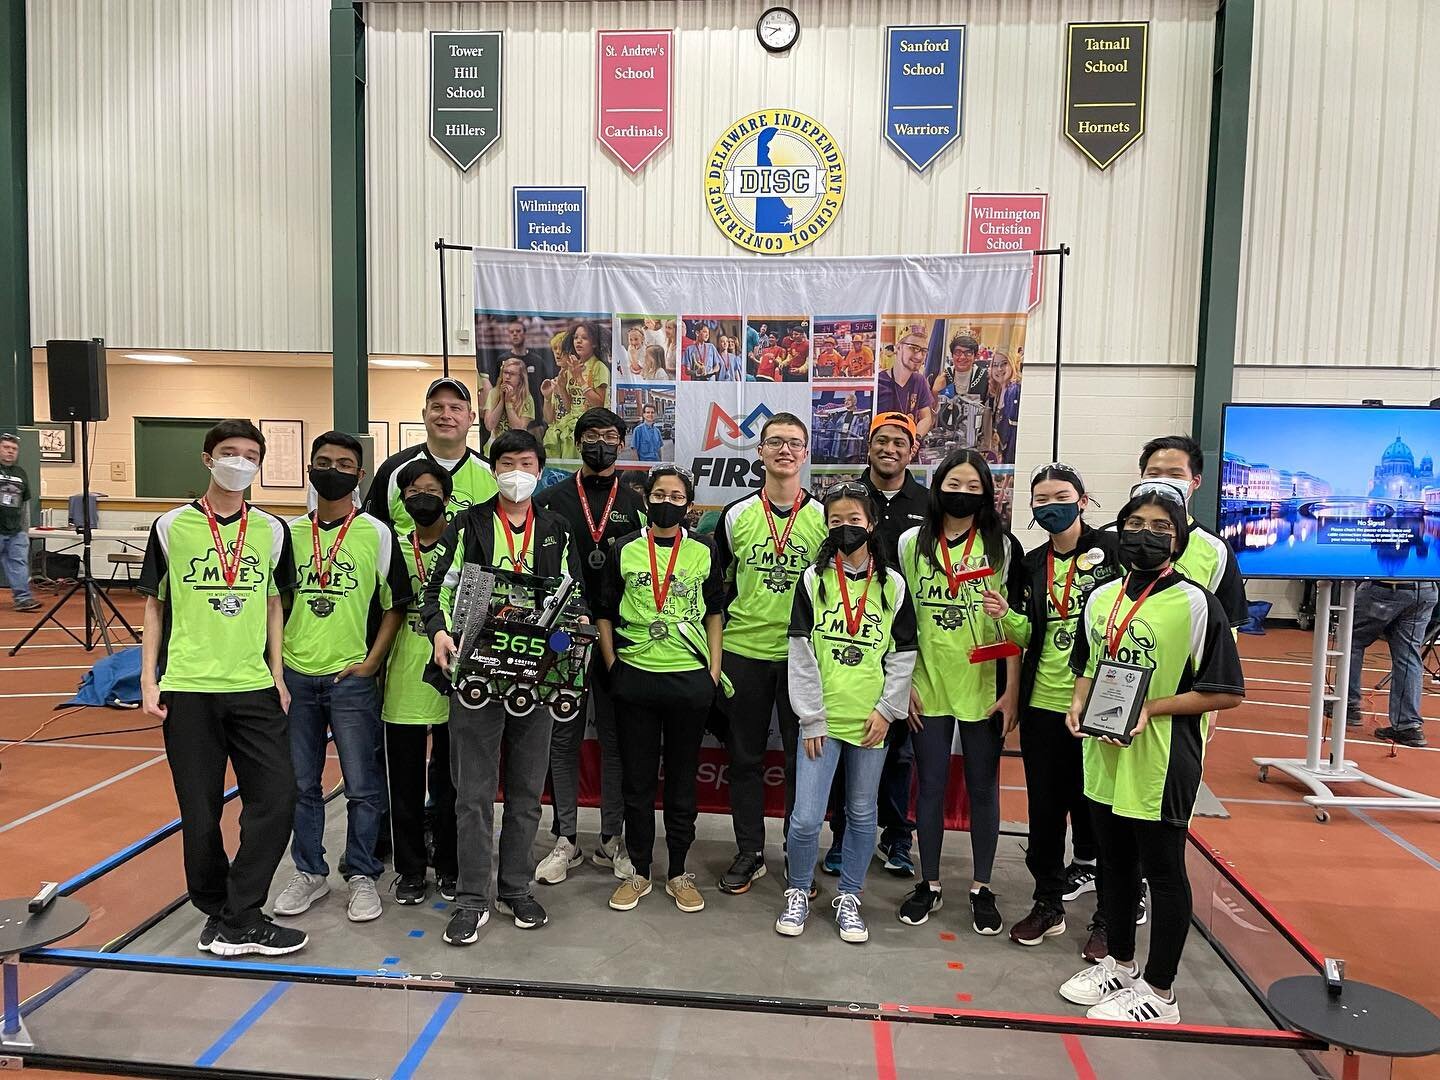 We all had so much fun at States this weekend and can&rsquo;t wait to represent Delaware at World Championships in April!

Thank you to all the volunteers and teams who made this event so successful! It was amazing seeing such a great showing of robo